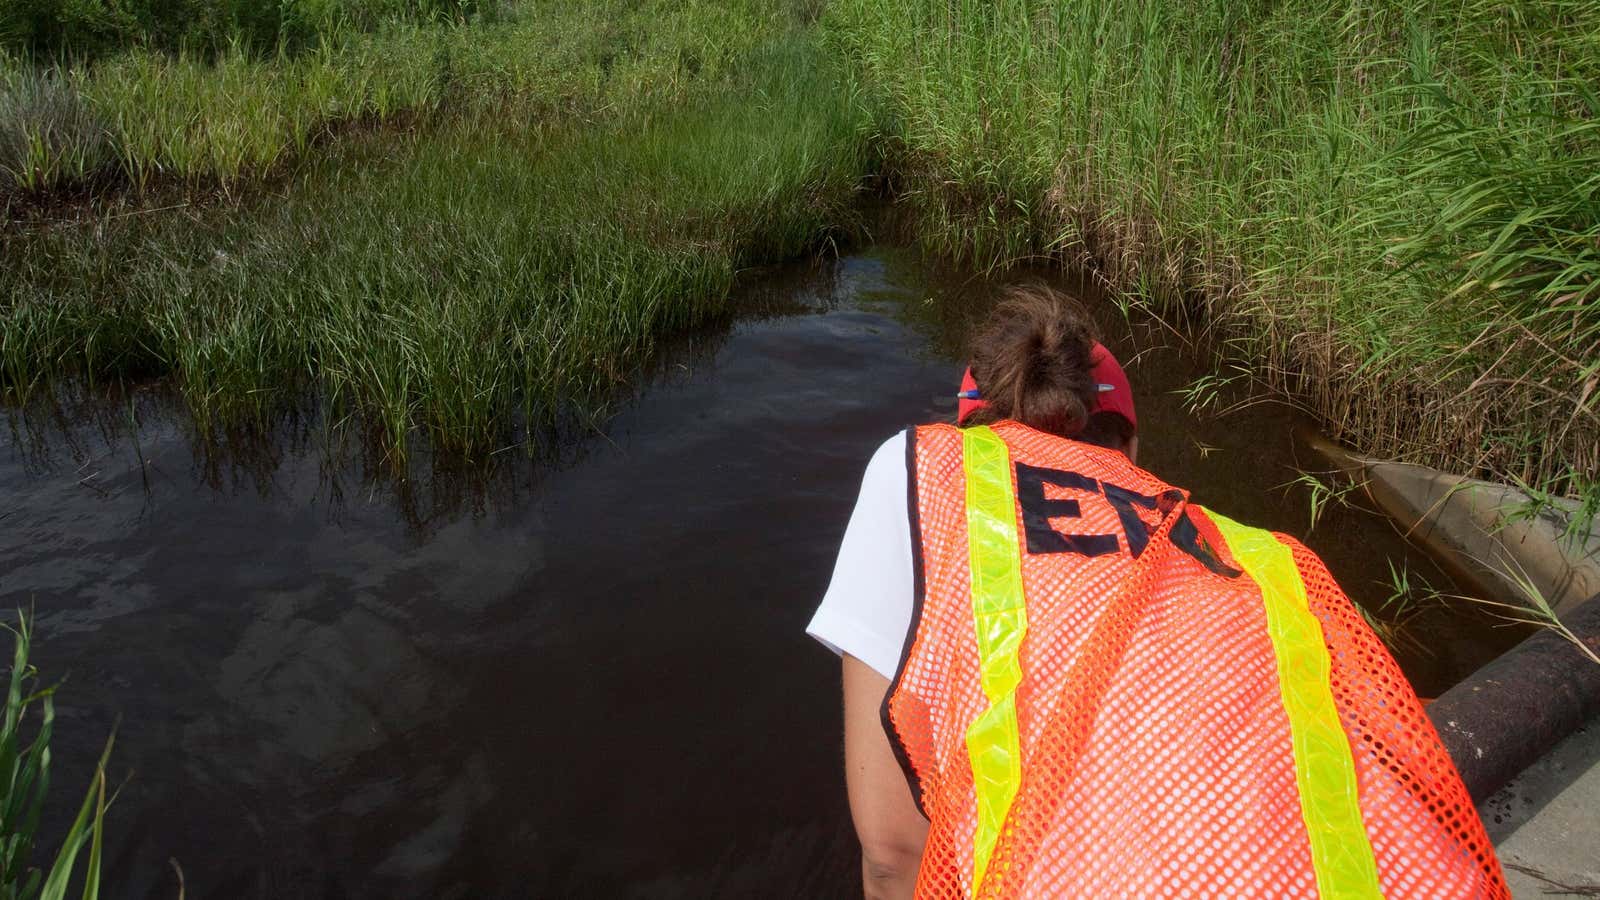 The EPA is the first federal responder in oil and chemical spills, which could be a big issue after Florence’s flooding.